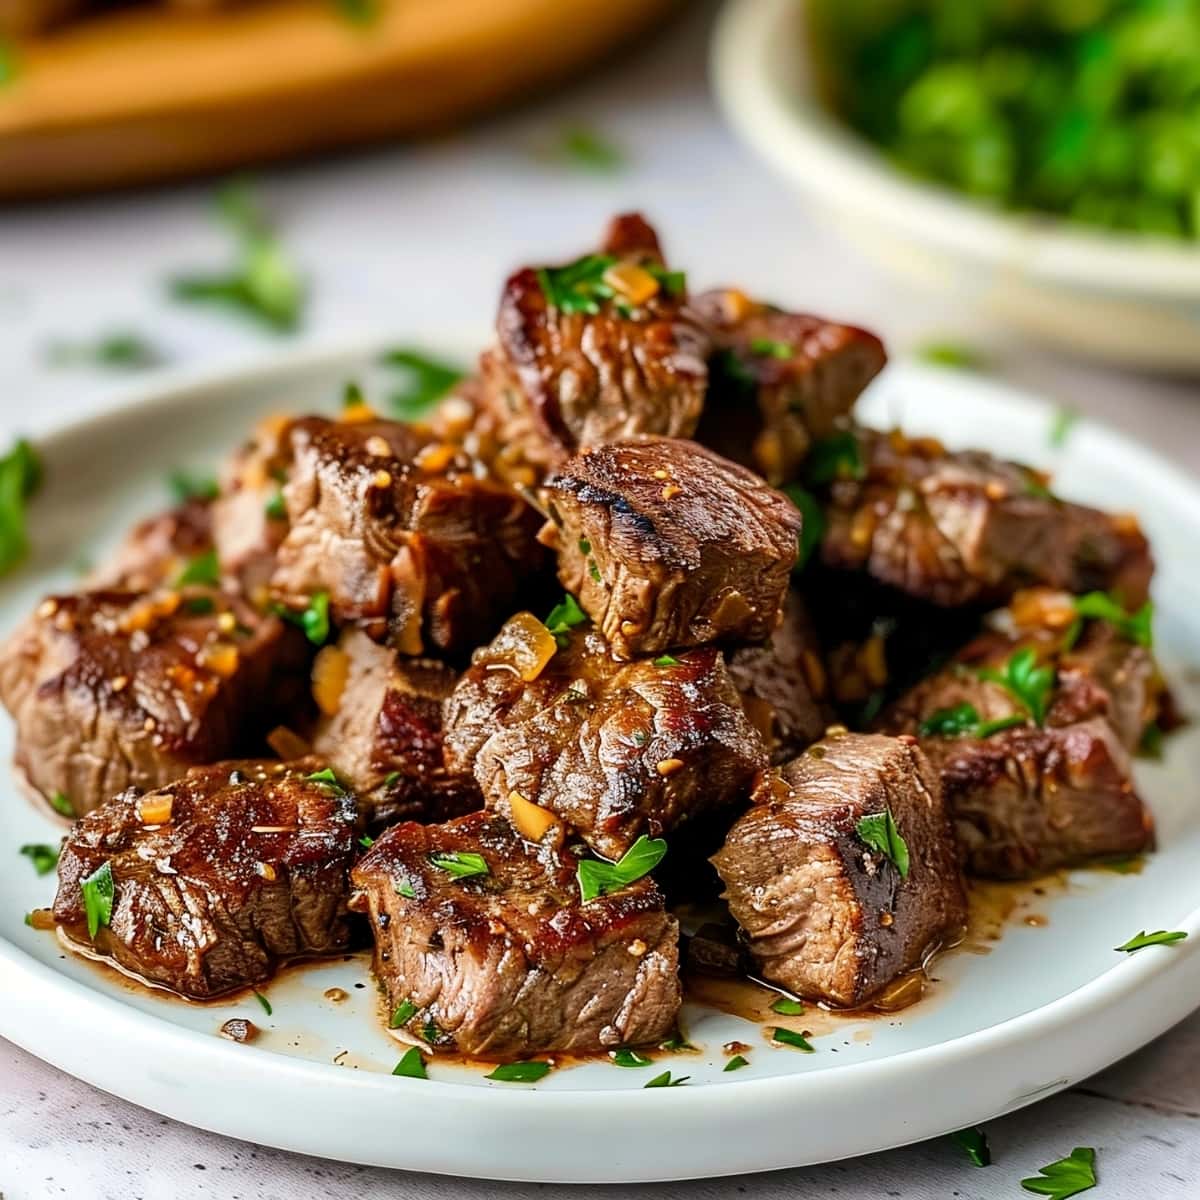 garlic butter steak bites seasoned with garlic and herbs, a mouthwatering dish bursting with flavor